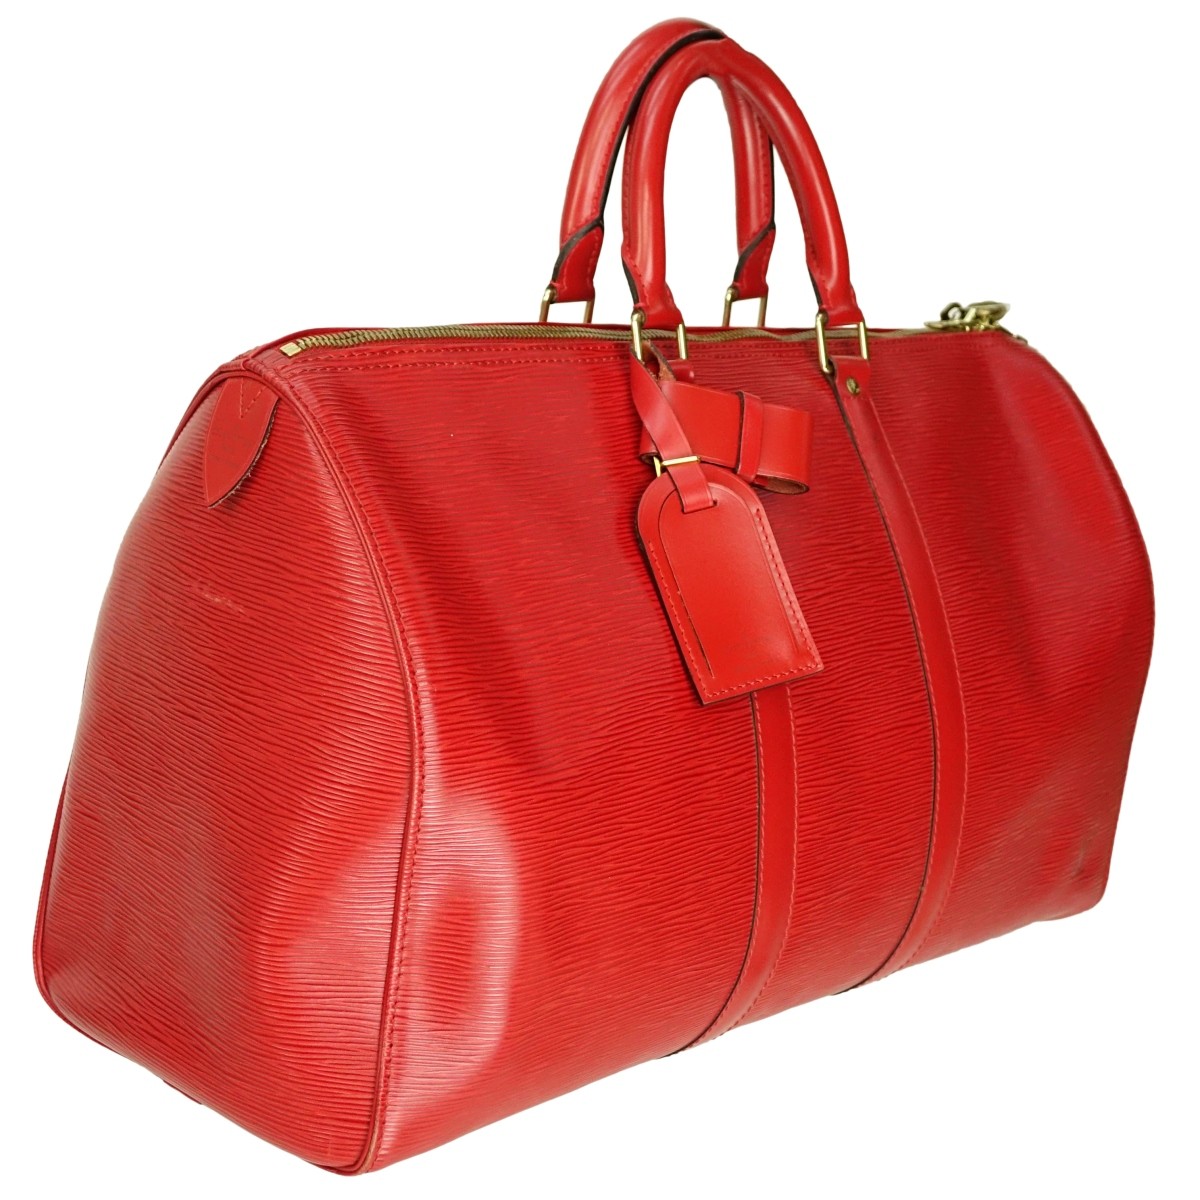 Louis Vuitton Red Epi Leather Keepall Travel Bag